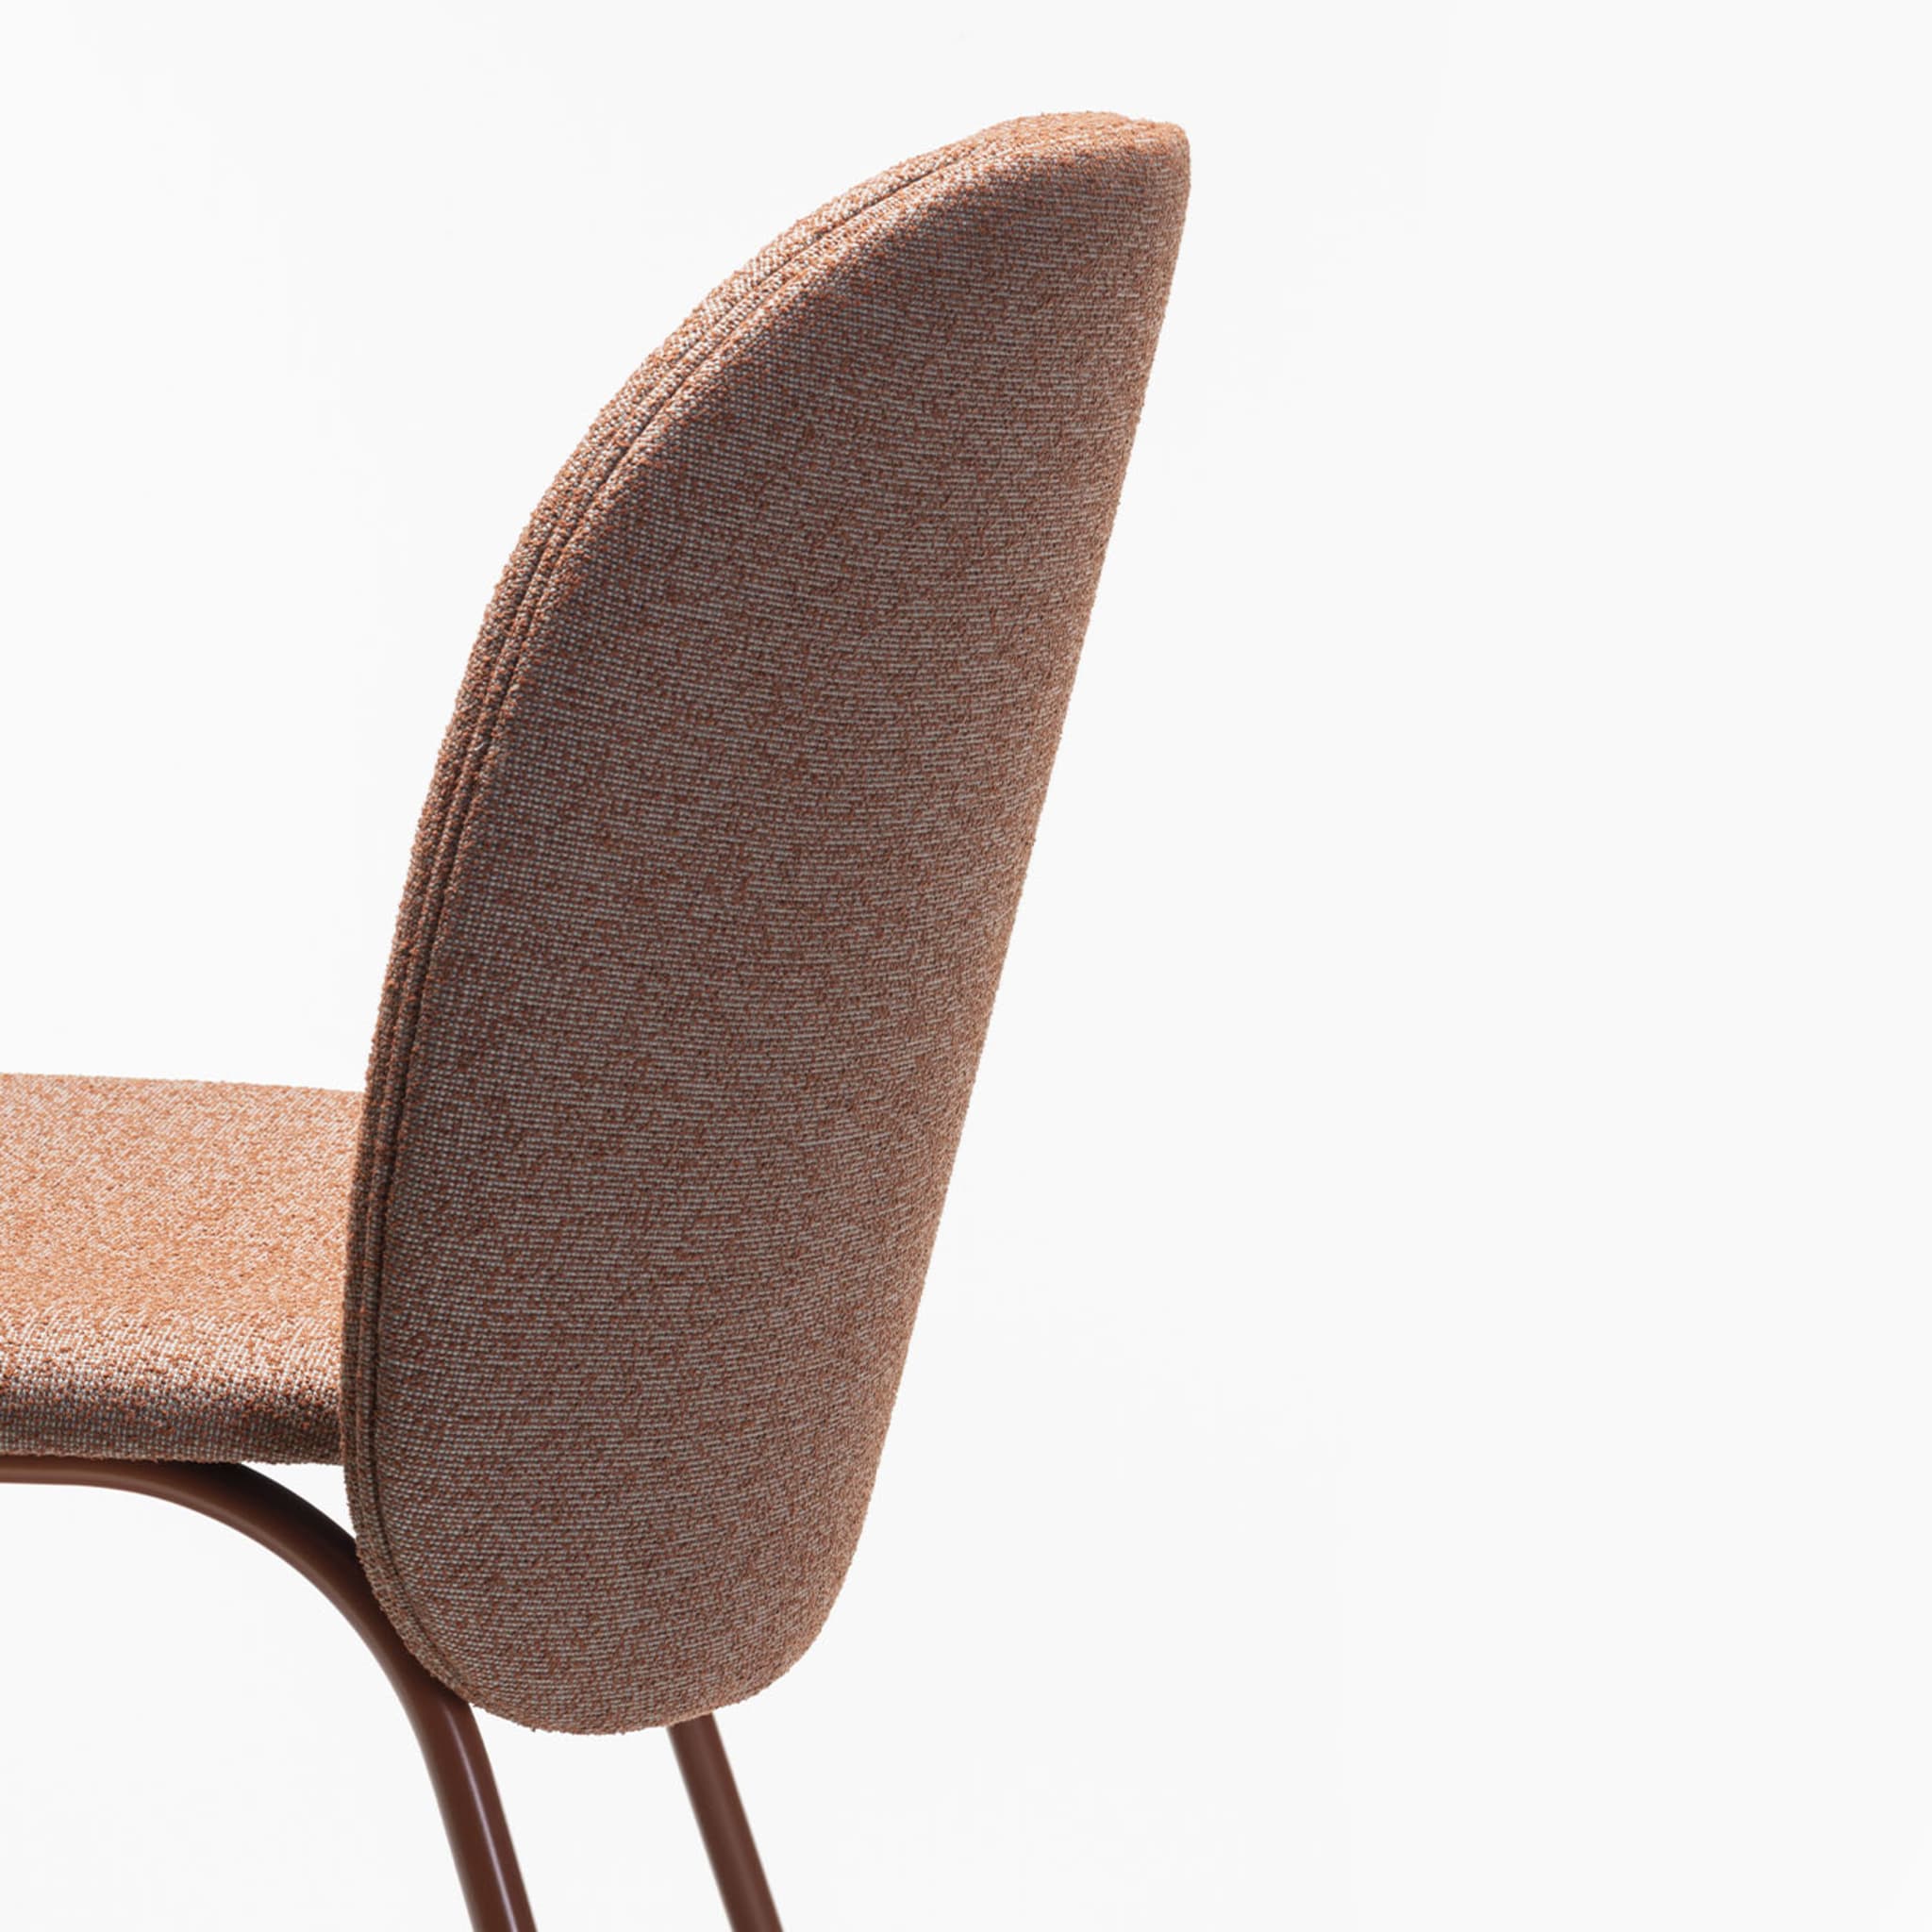 Chips M Terracotta Chair By Studio Pastina - Alternative view 3